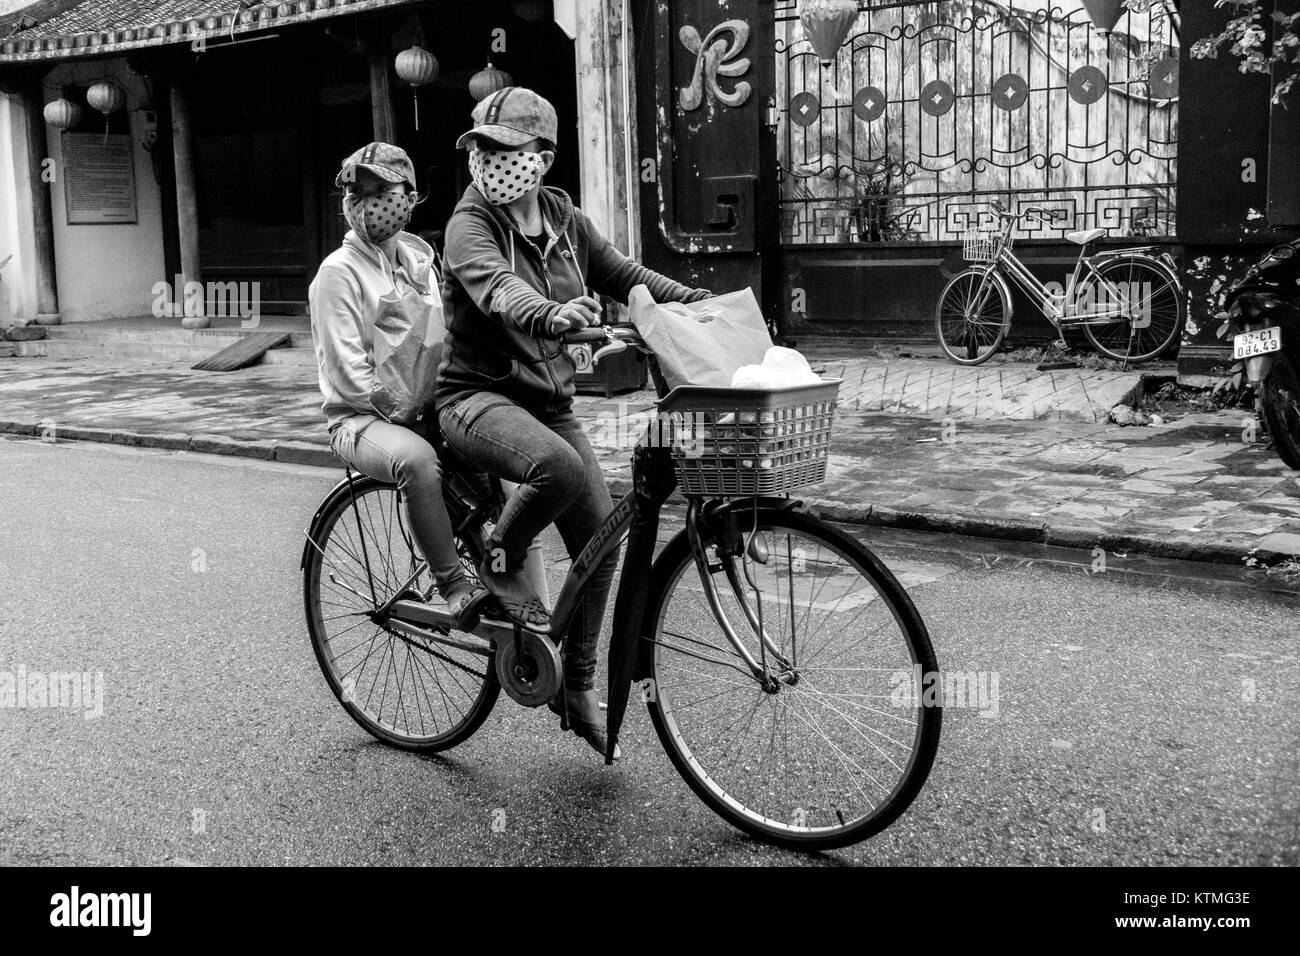 masked cyclist and passanger riding though thr streets of Hoi An Ancient Town, Vietnam. Stock Photo